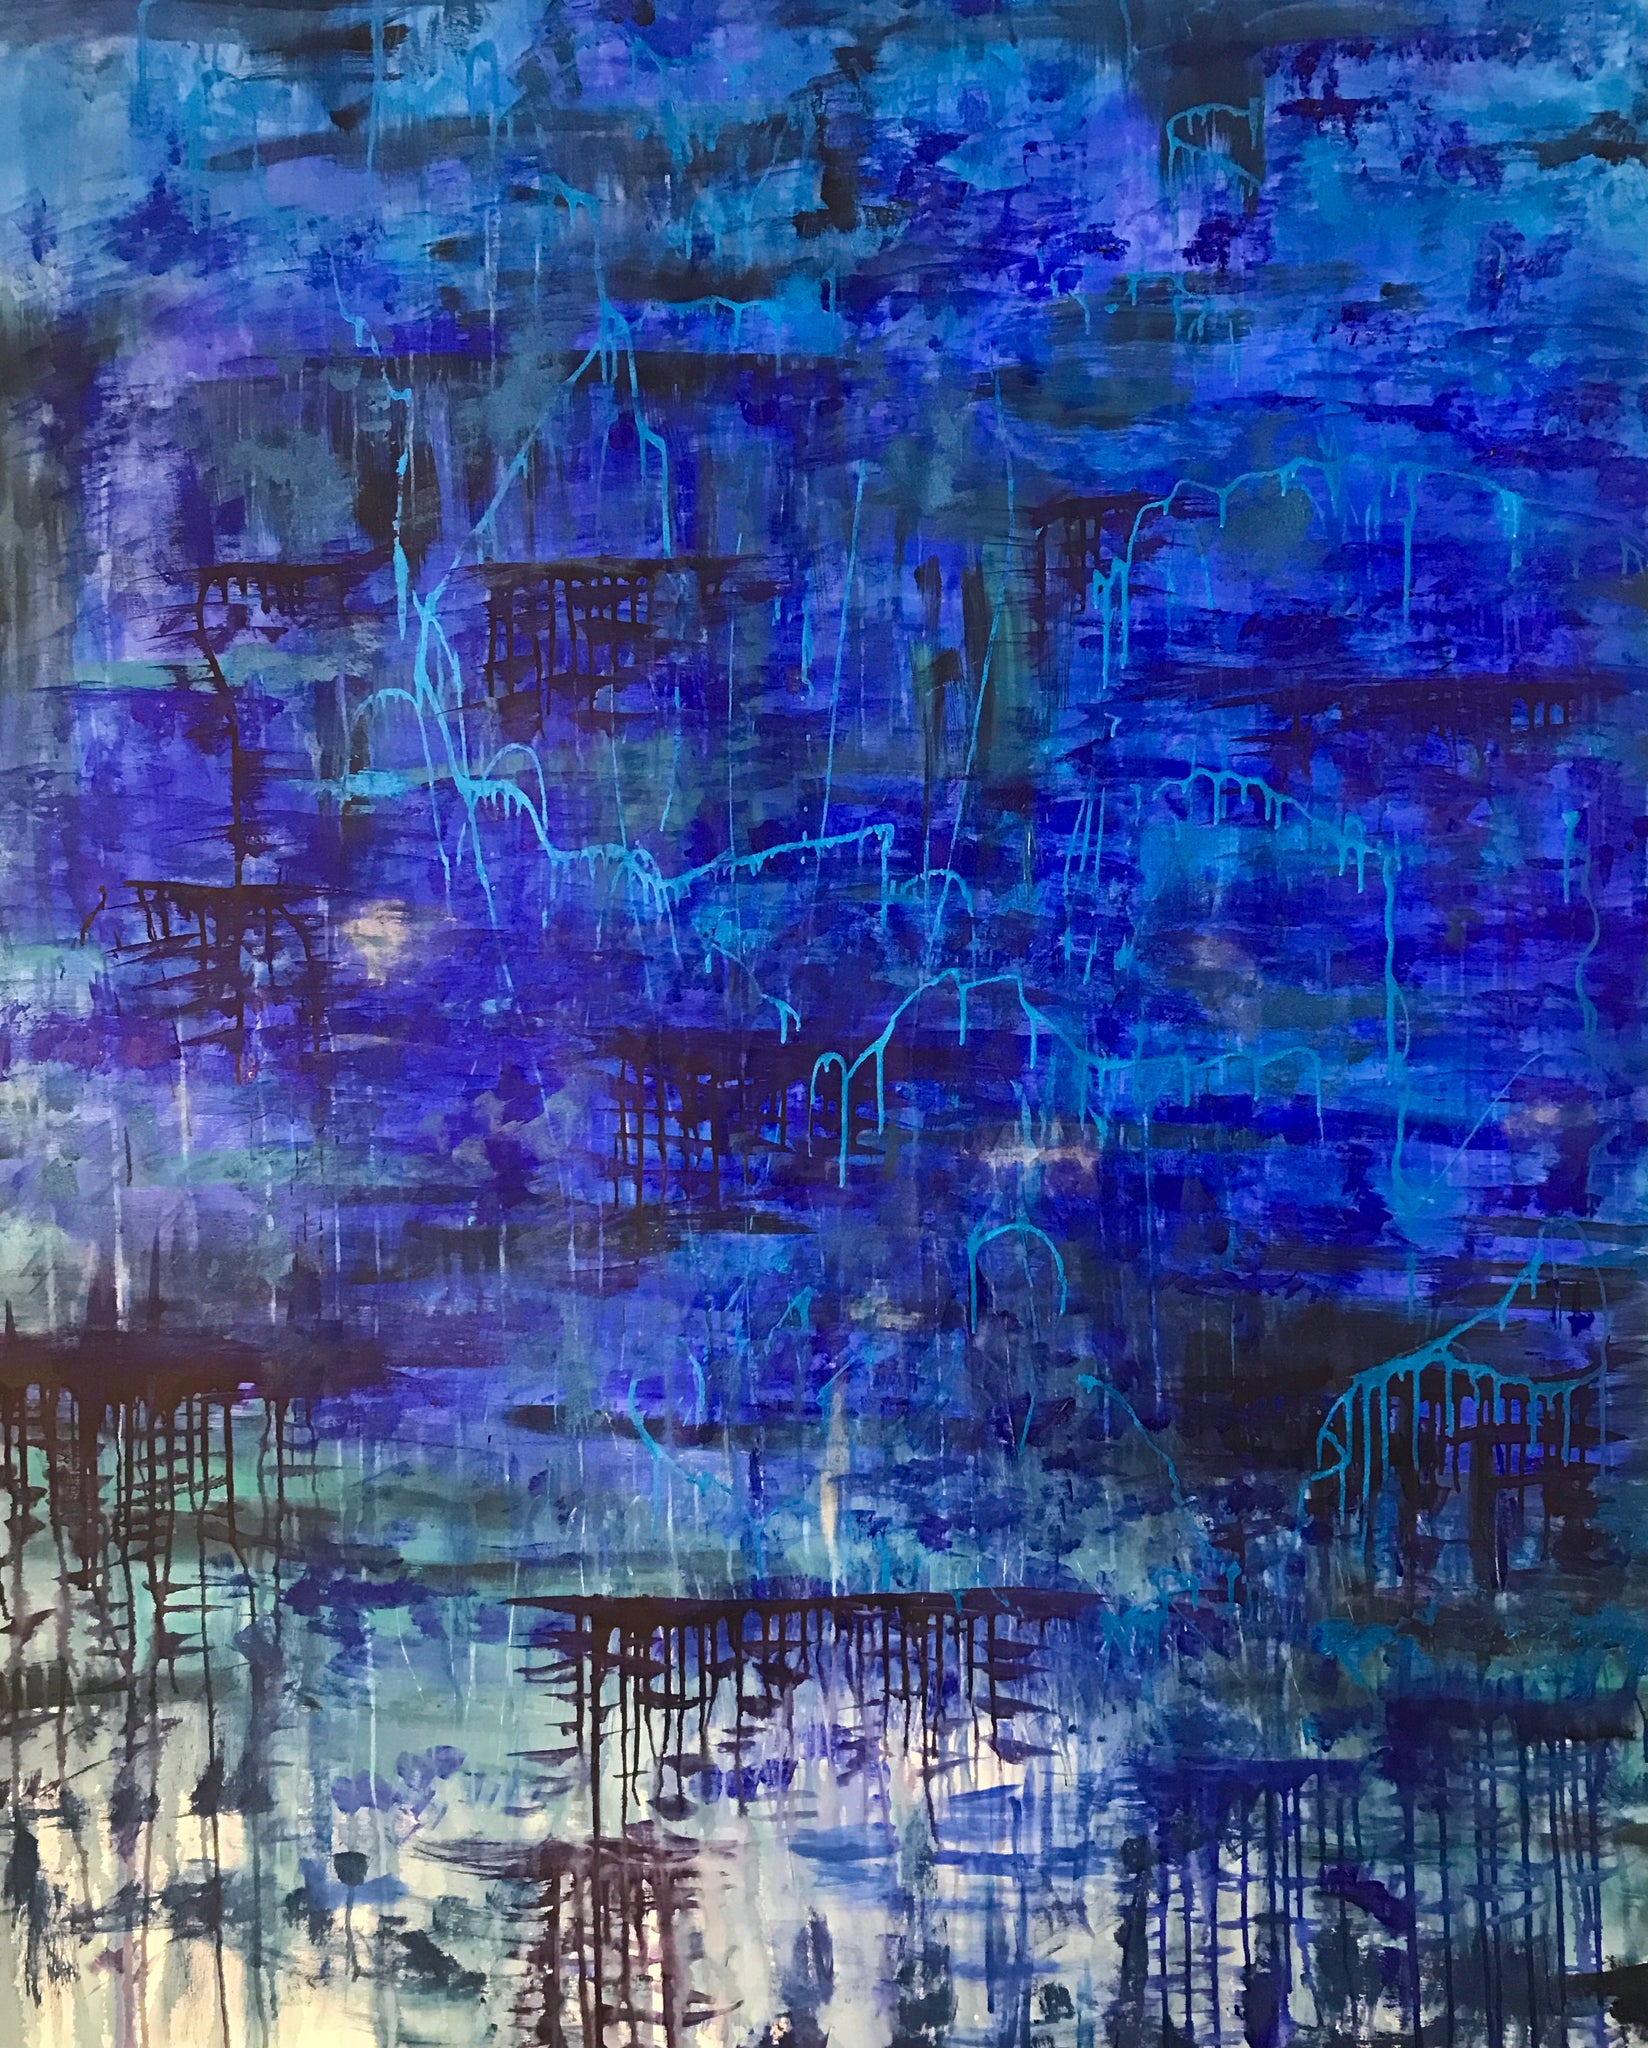 Water Mother - Abstract Blue Large Scale painting on canvas - House of Yvette Michele 